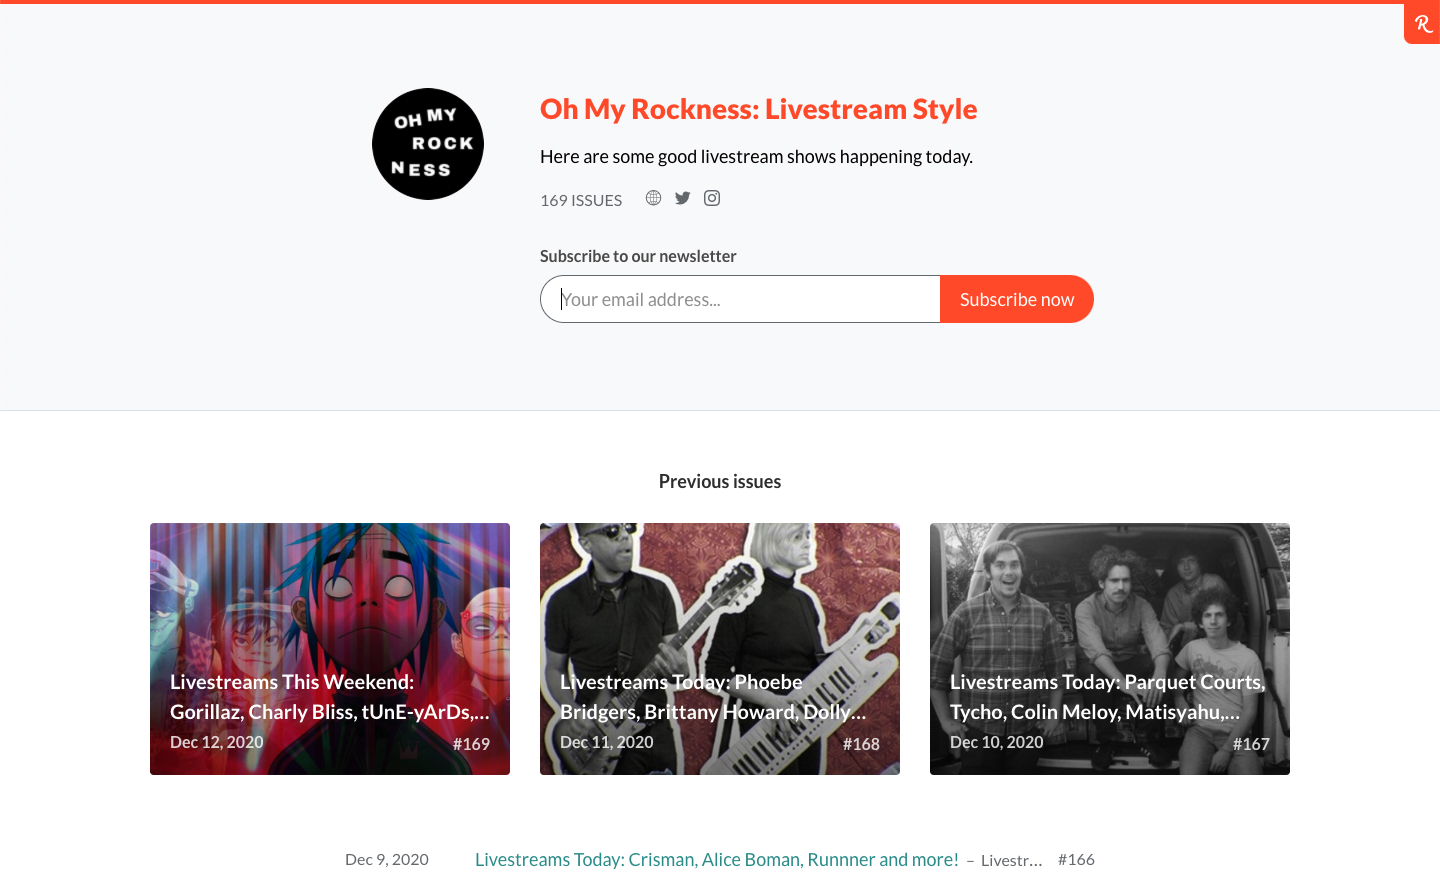 Oh My Rockness: Livestream Style homepage